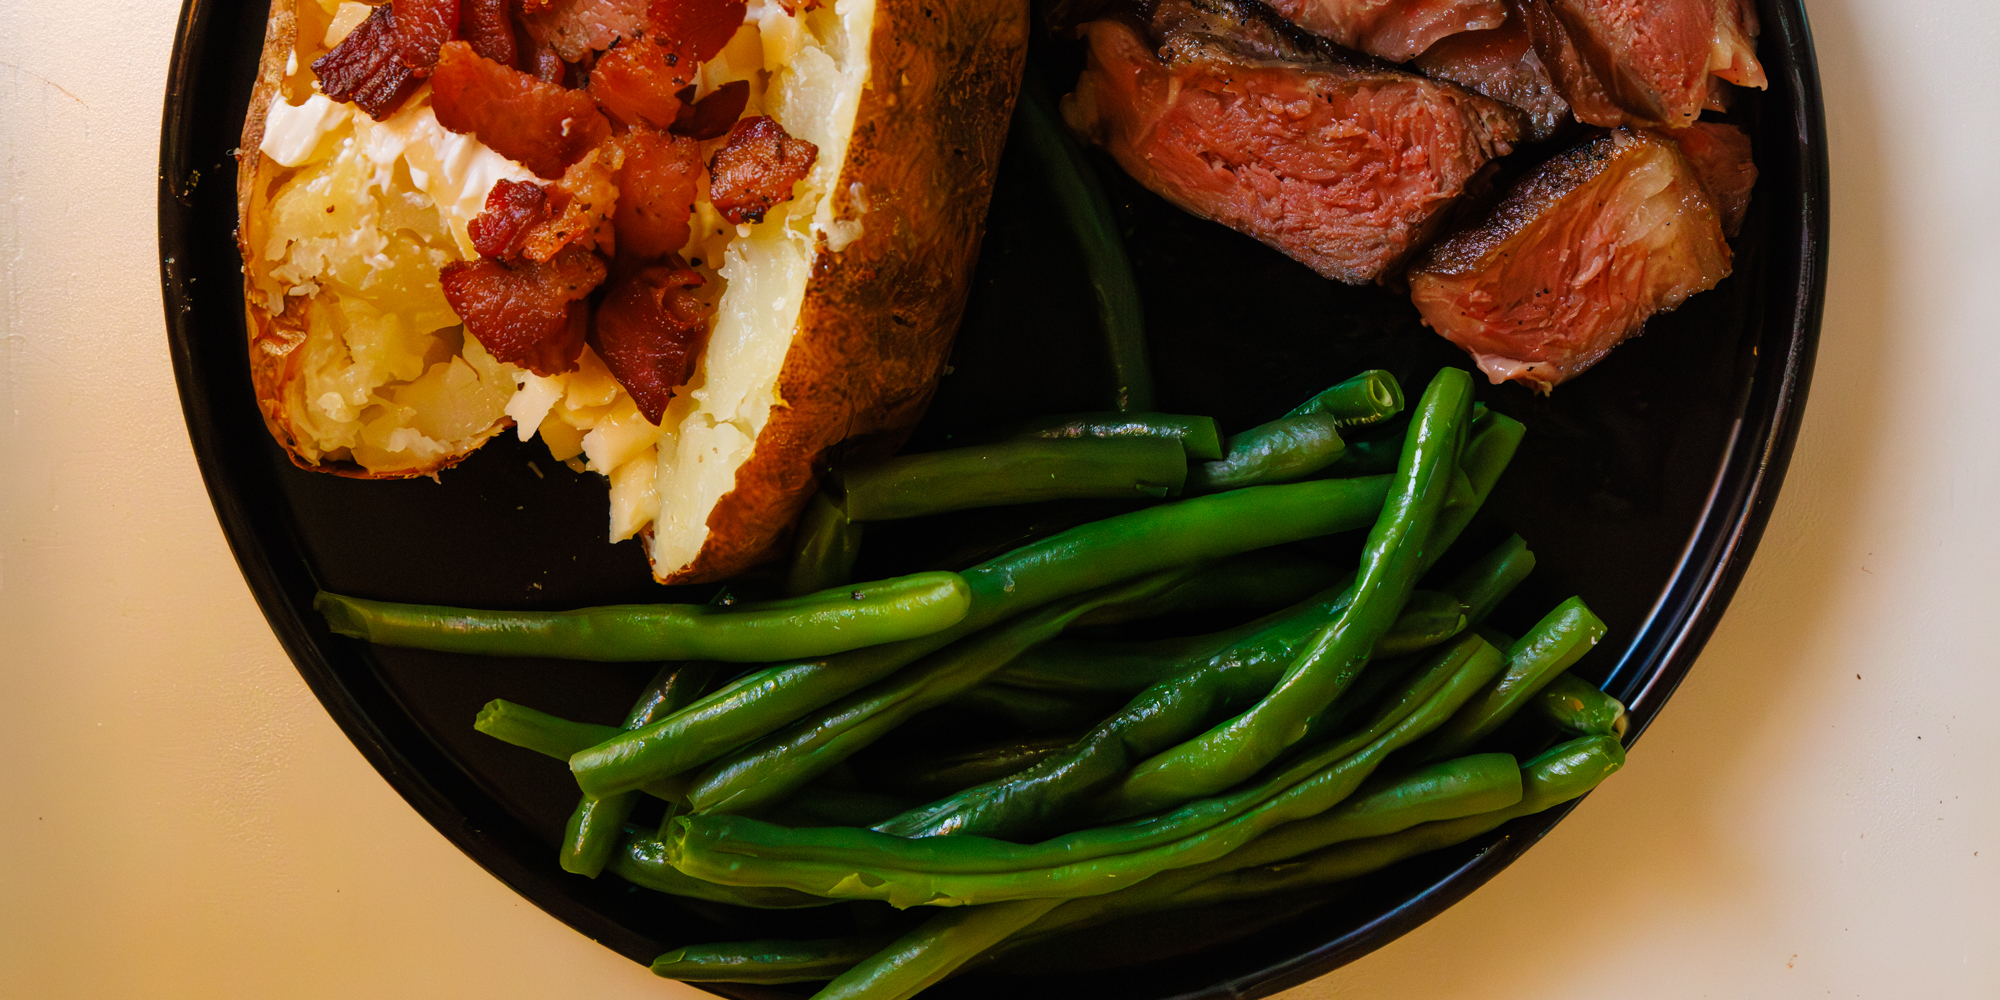 Green beans with steak and baked potato